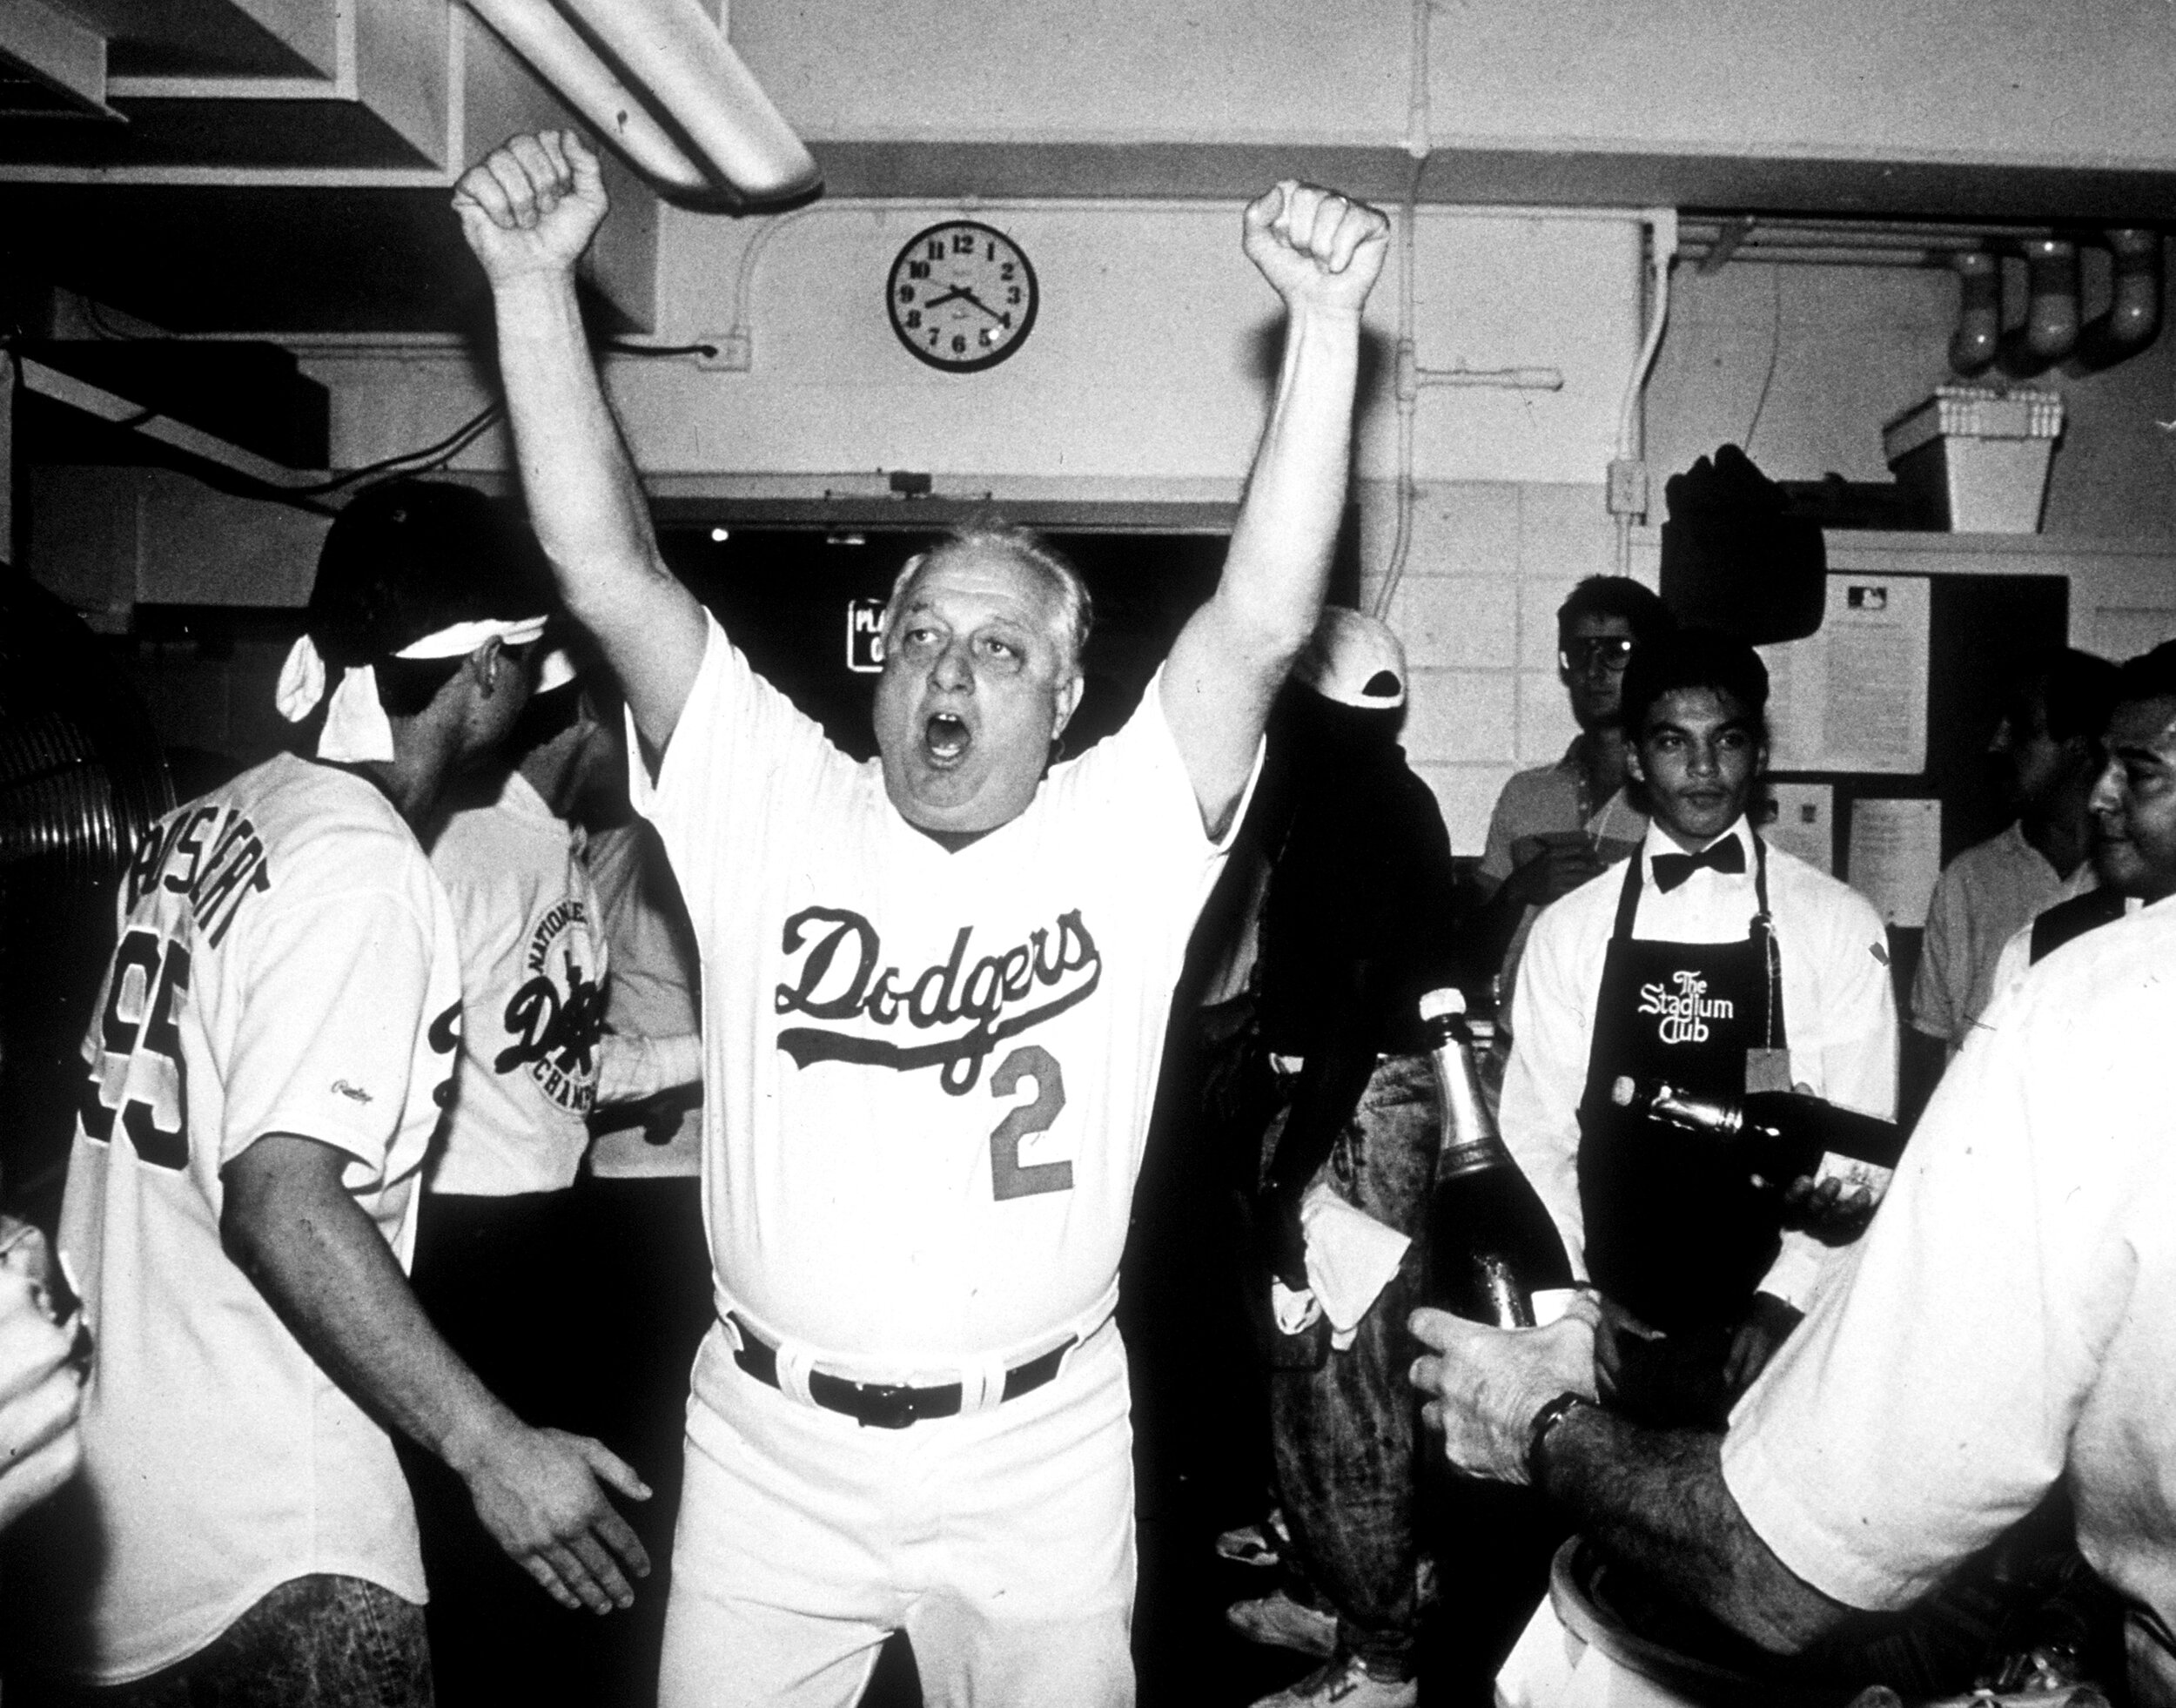  LOS ANGELES, CA - 1988 :  Manager Tommy Lasorda #2 of the Los Angeles Dodgers celebrates after winning the 1988 NLDS at Dodger Stadium, Los Angeles, California.  (Photo by Jayne Kamin-Oncea/Getty Images)  